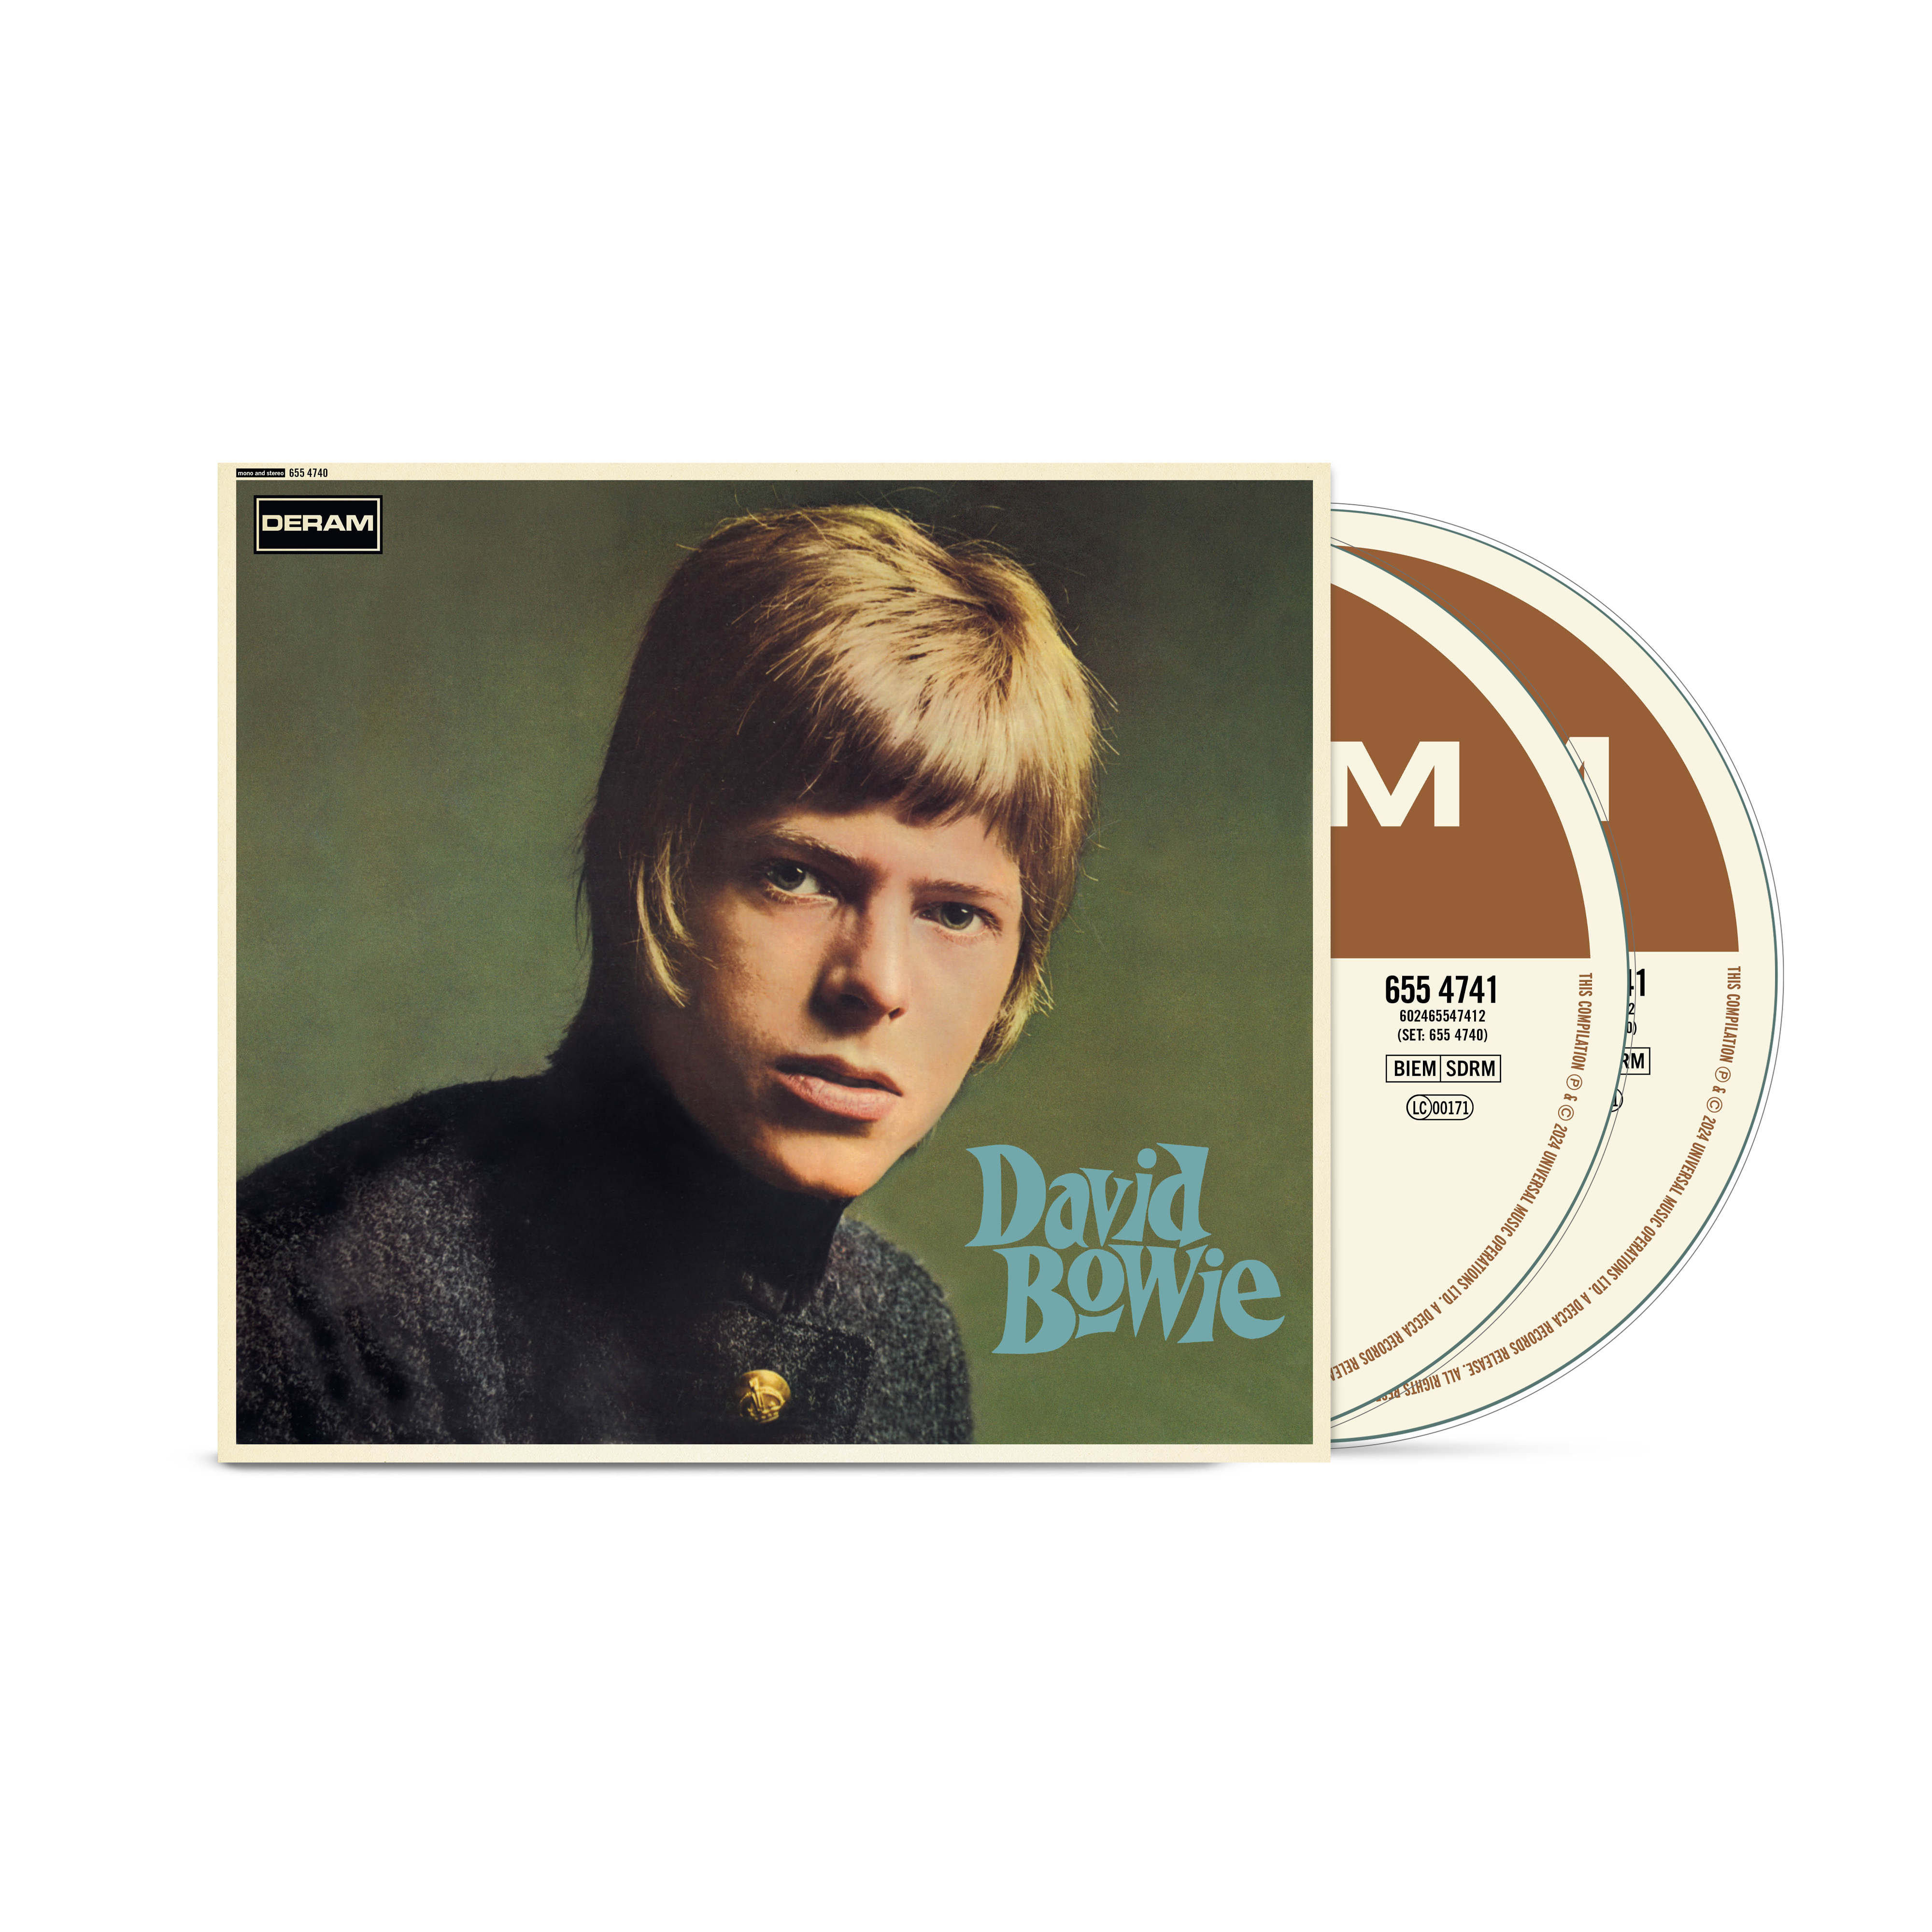 David Bowie - David Bowie: Deluxe Edition [2CD]